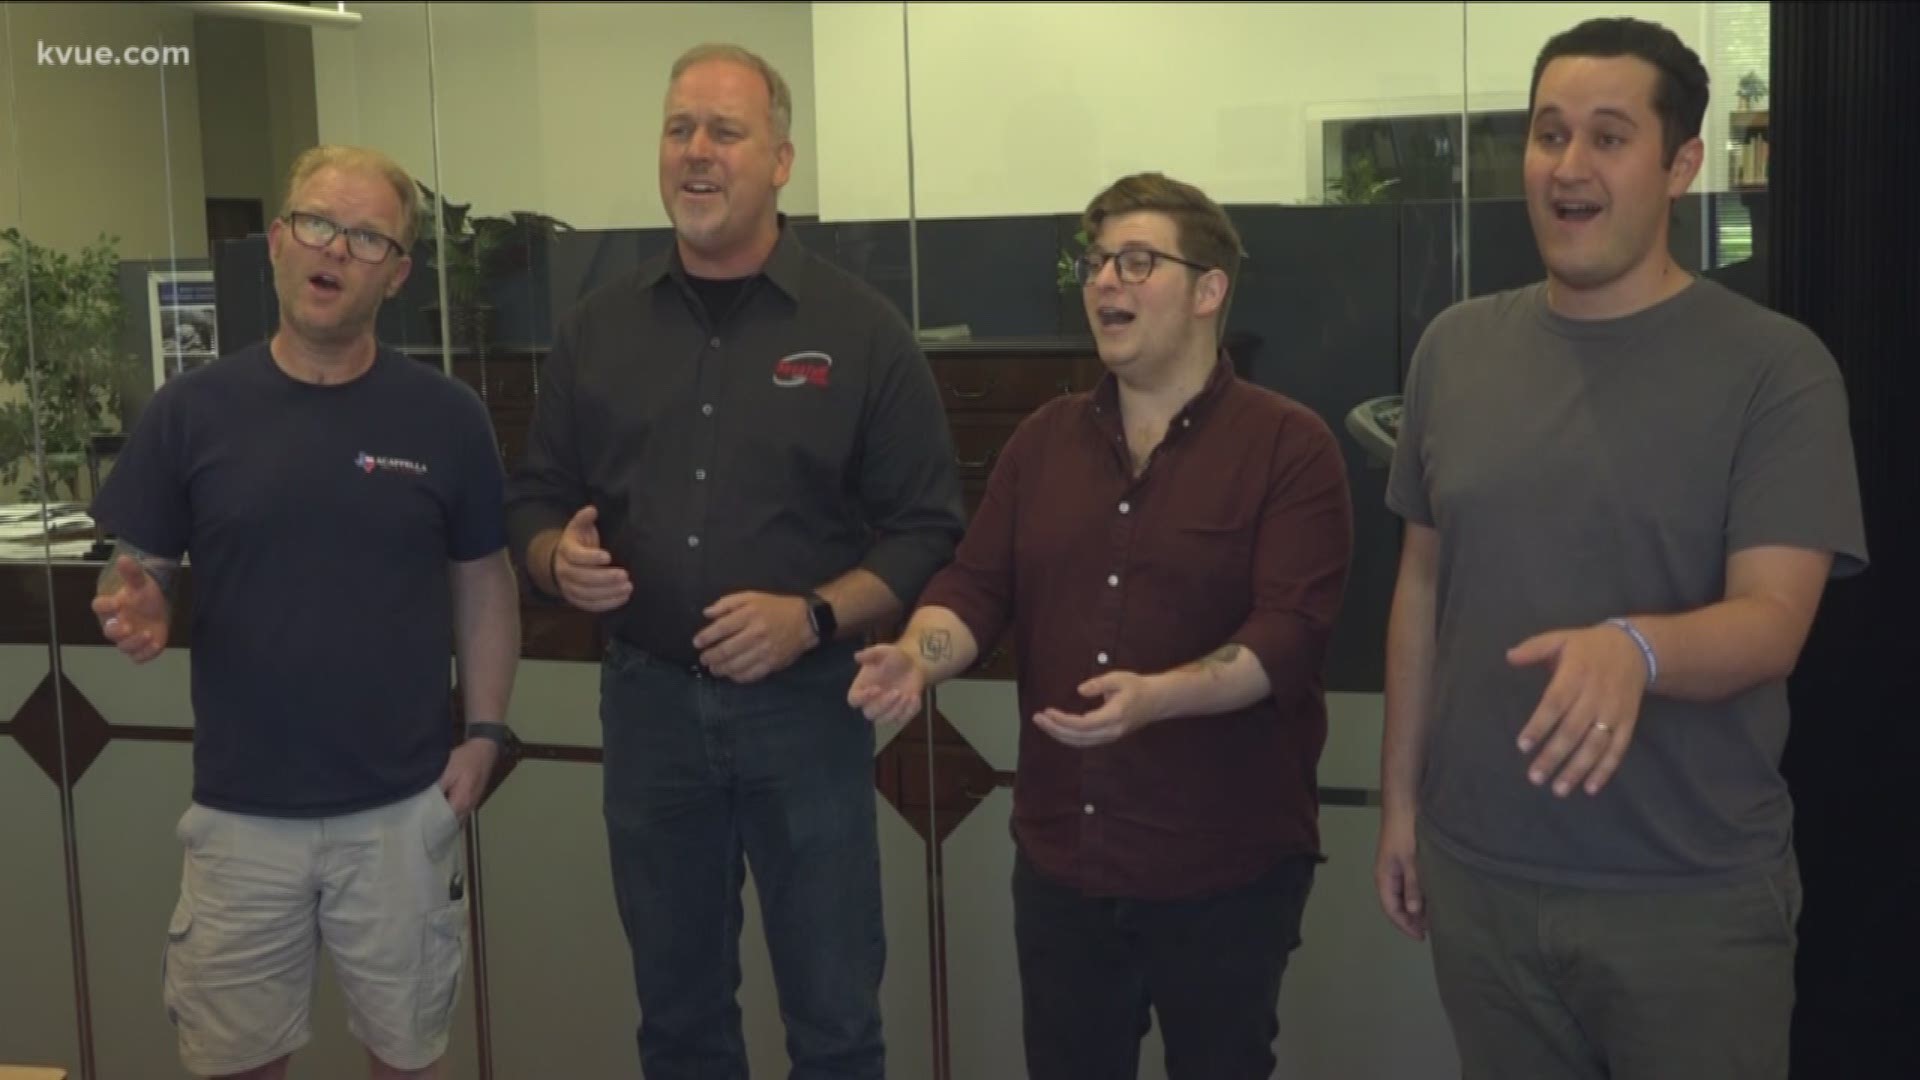 'Tempest' are competing at the Barbershop Harmony Society International Convention.